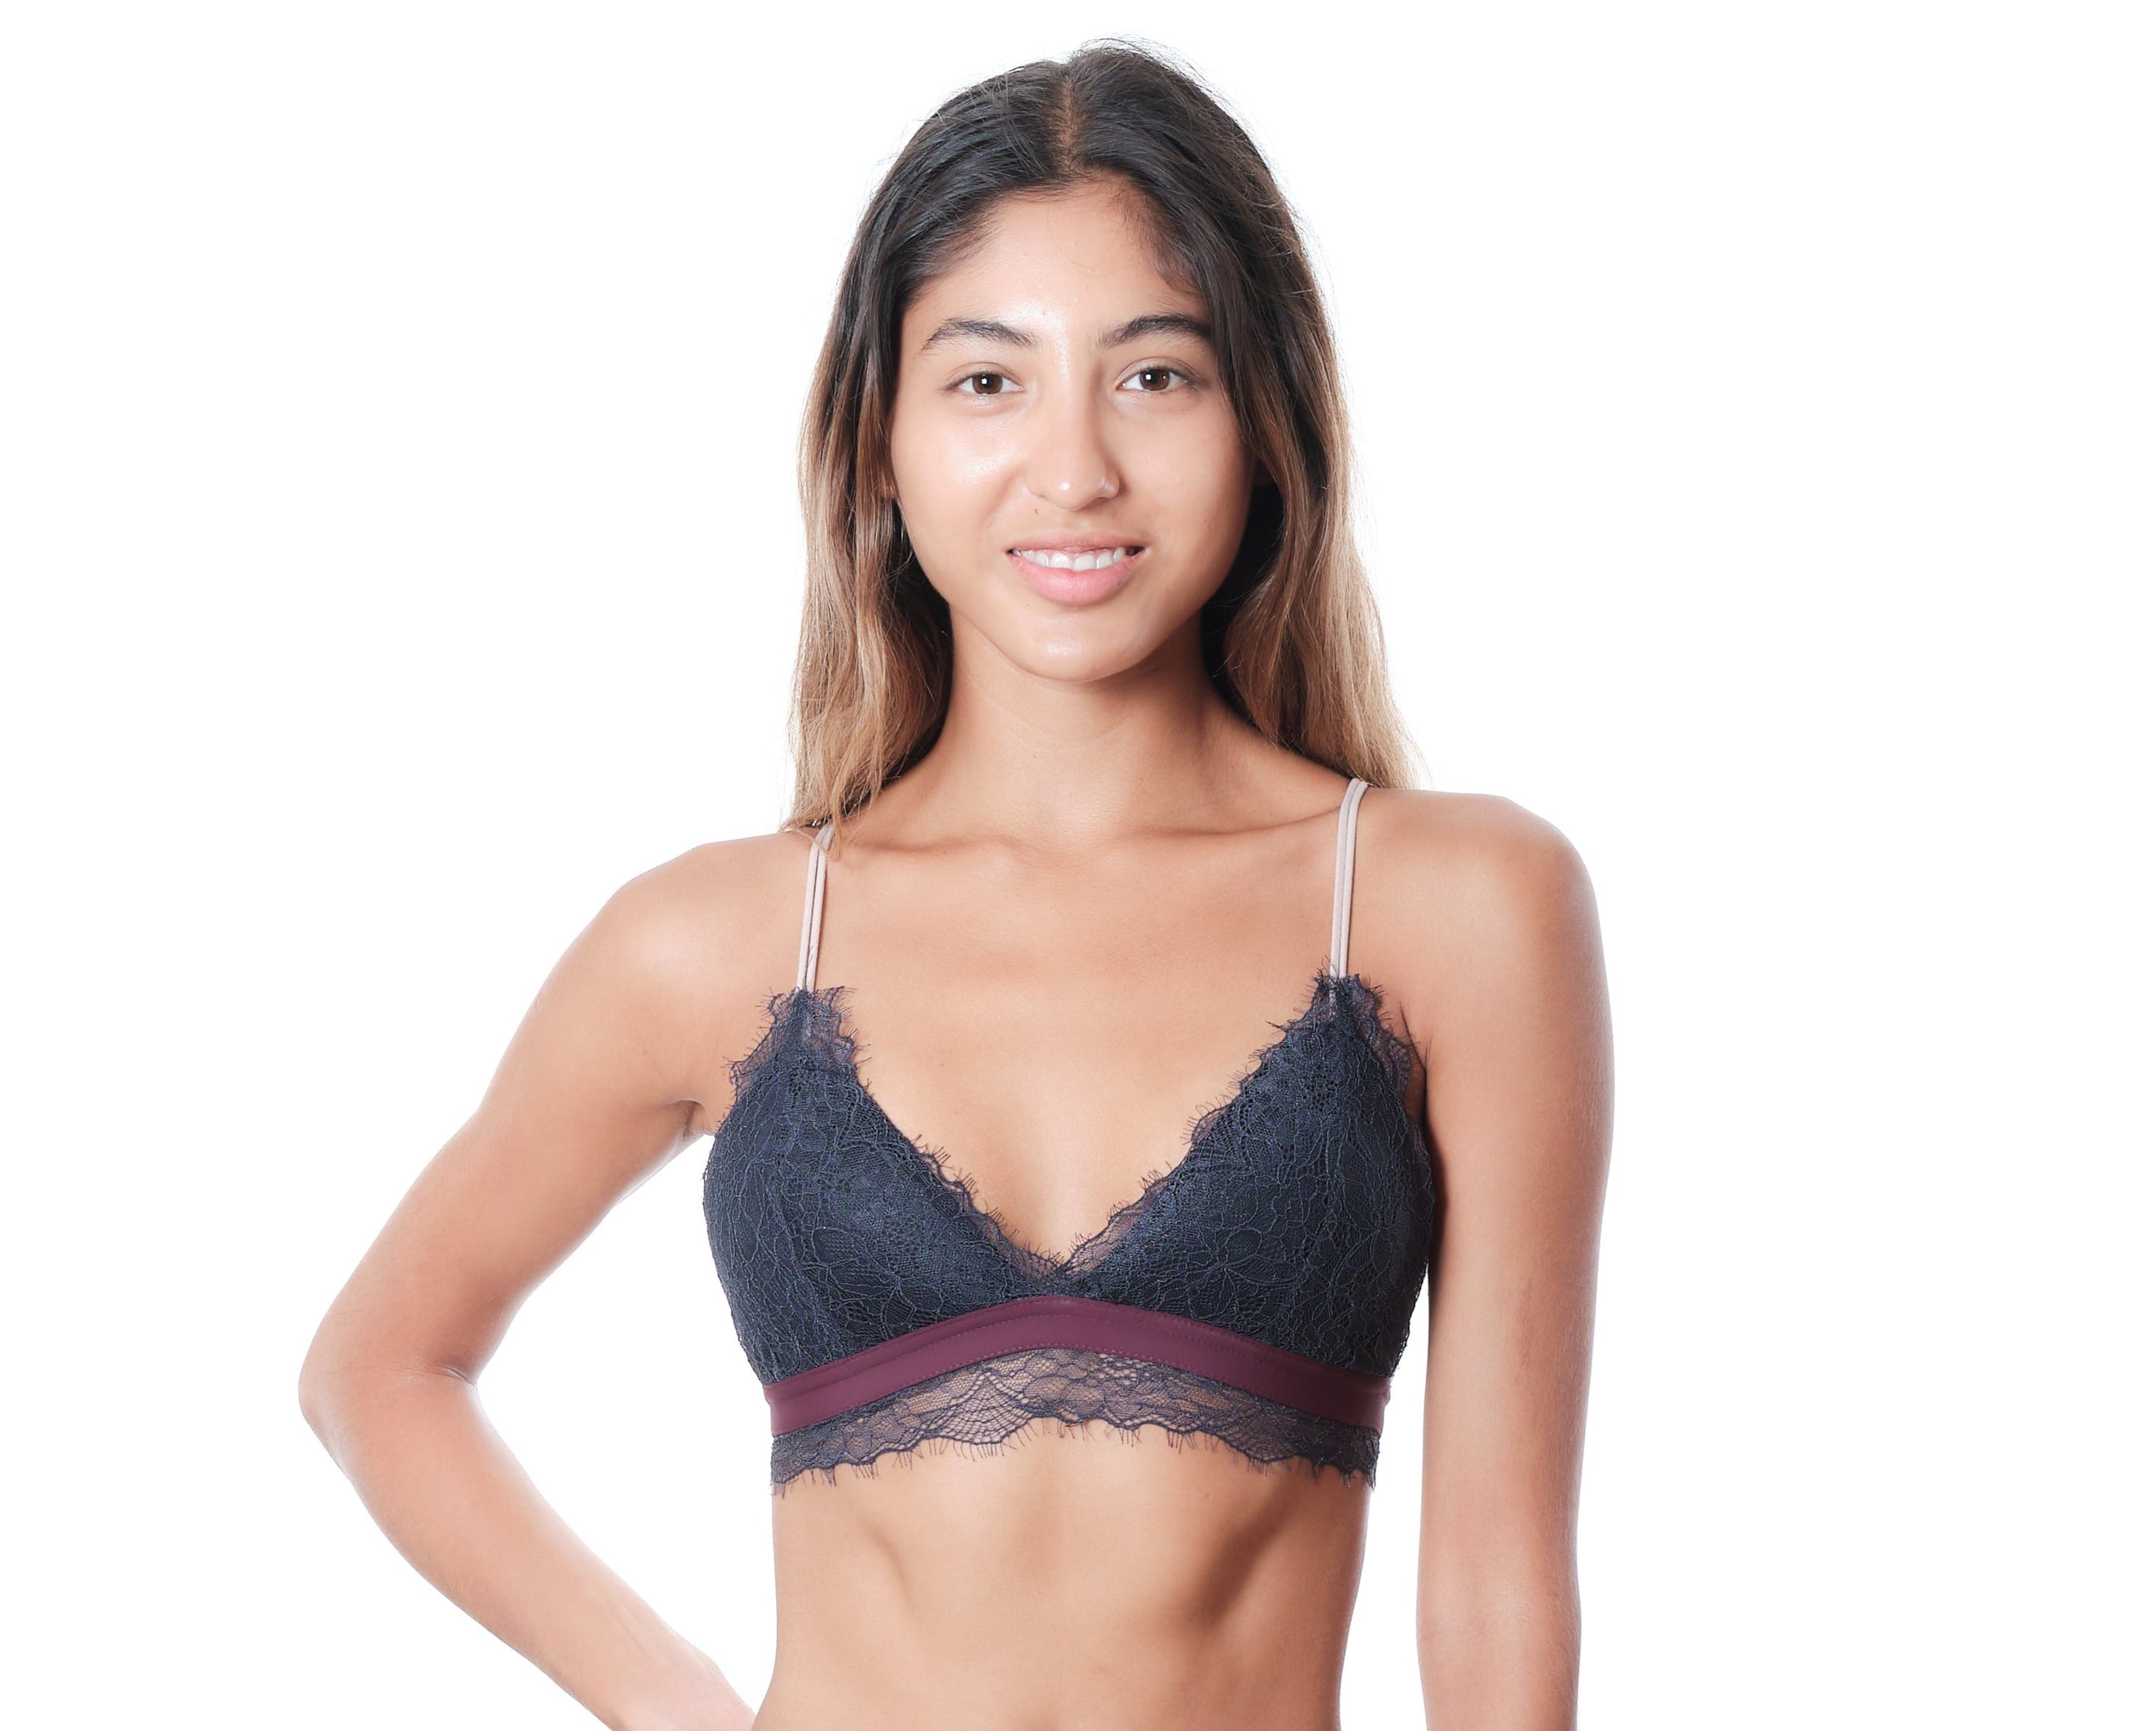 Lace Band Bralette